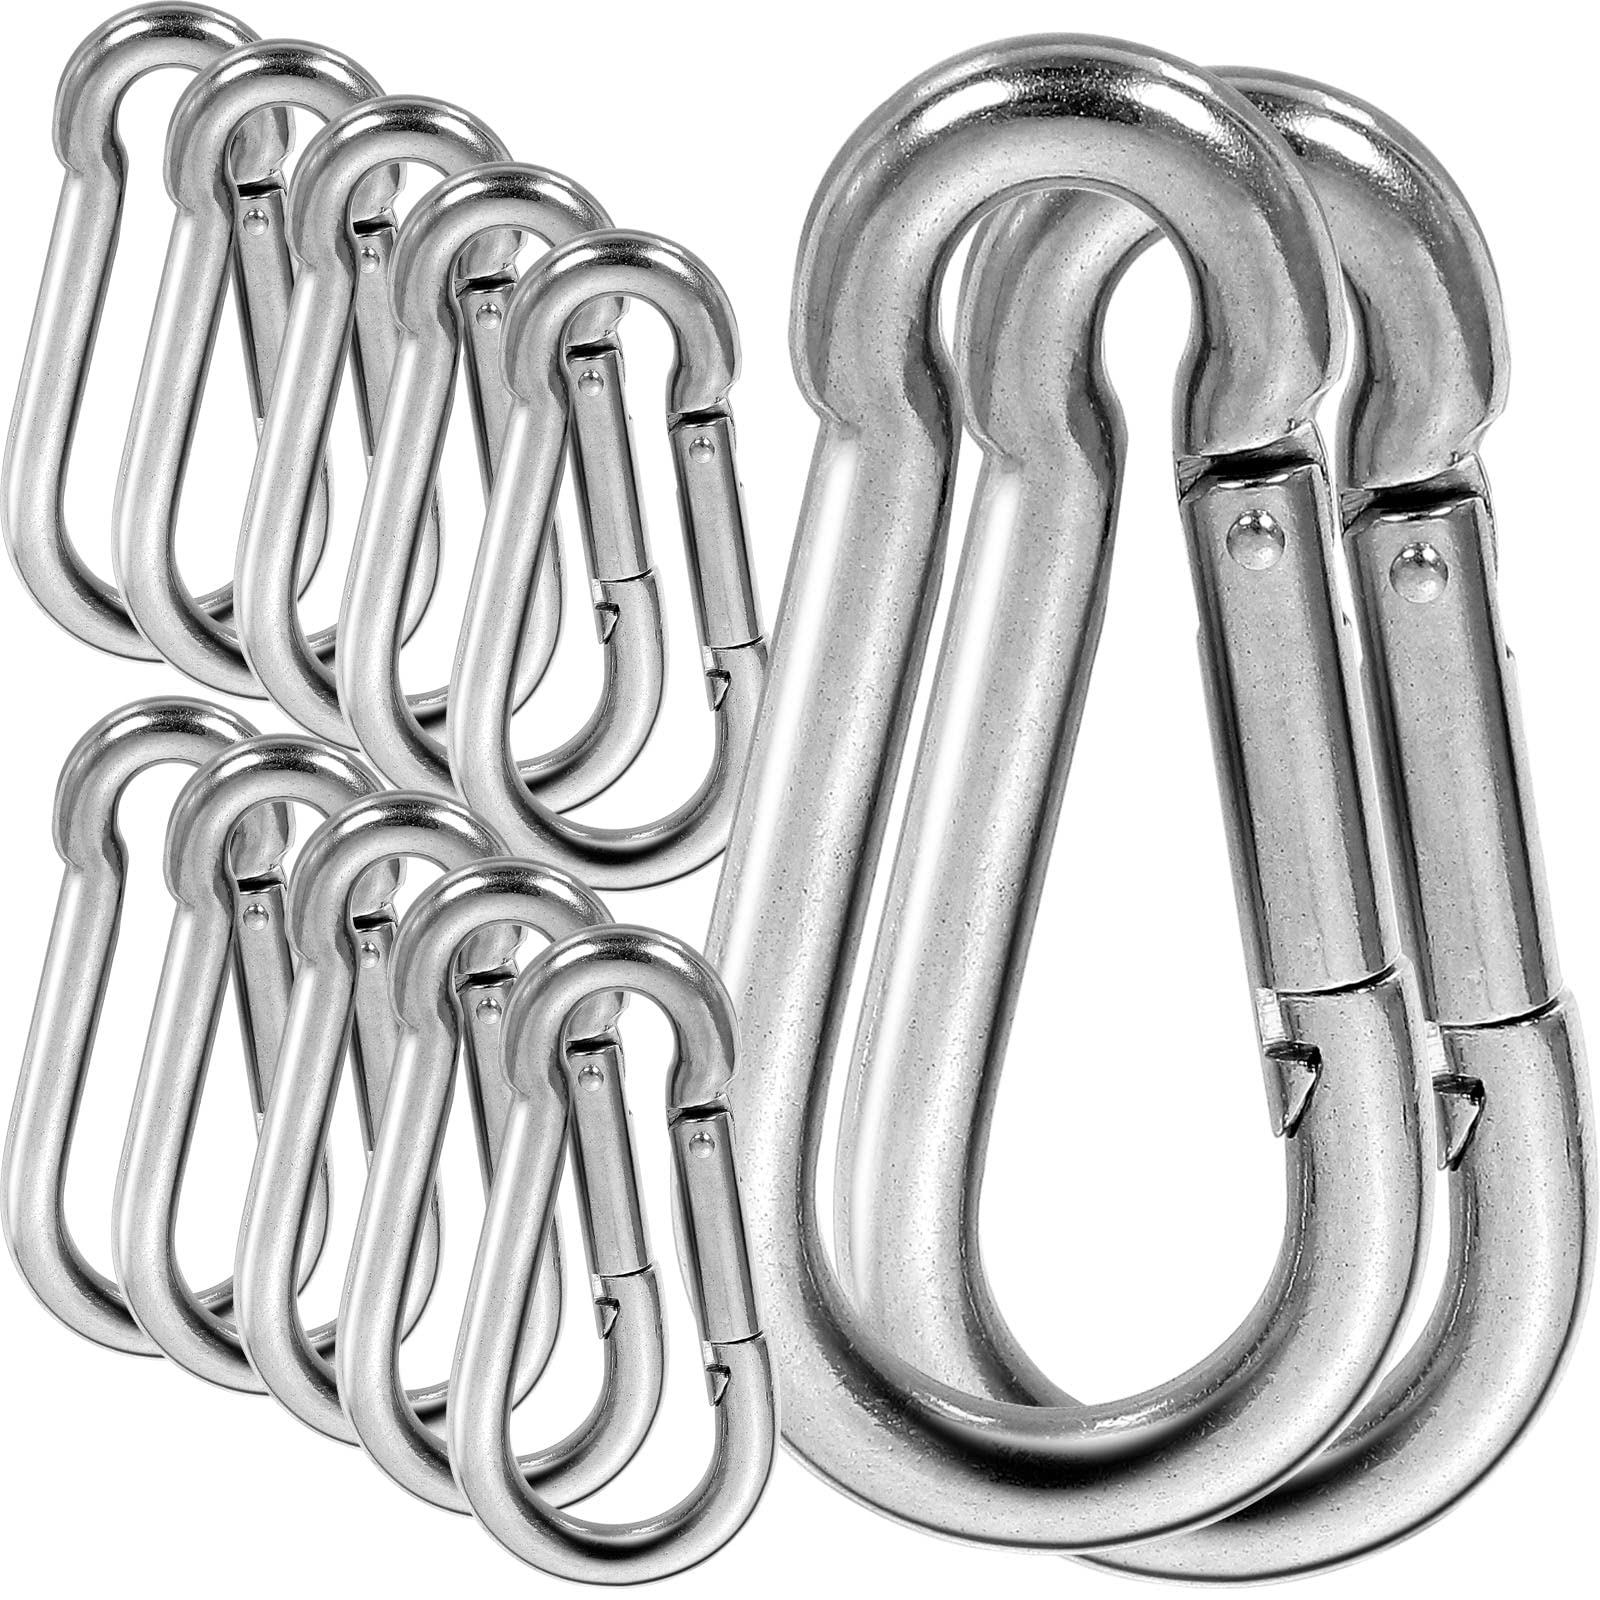 LANIAKEA 12Pcs 4inch Spring Snap Hook, M10 Stainless Steel Quick Links, 3/8  inch Large Carabiner